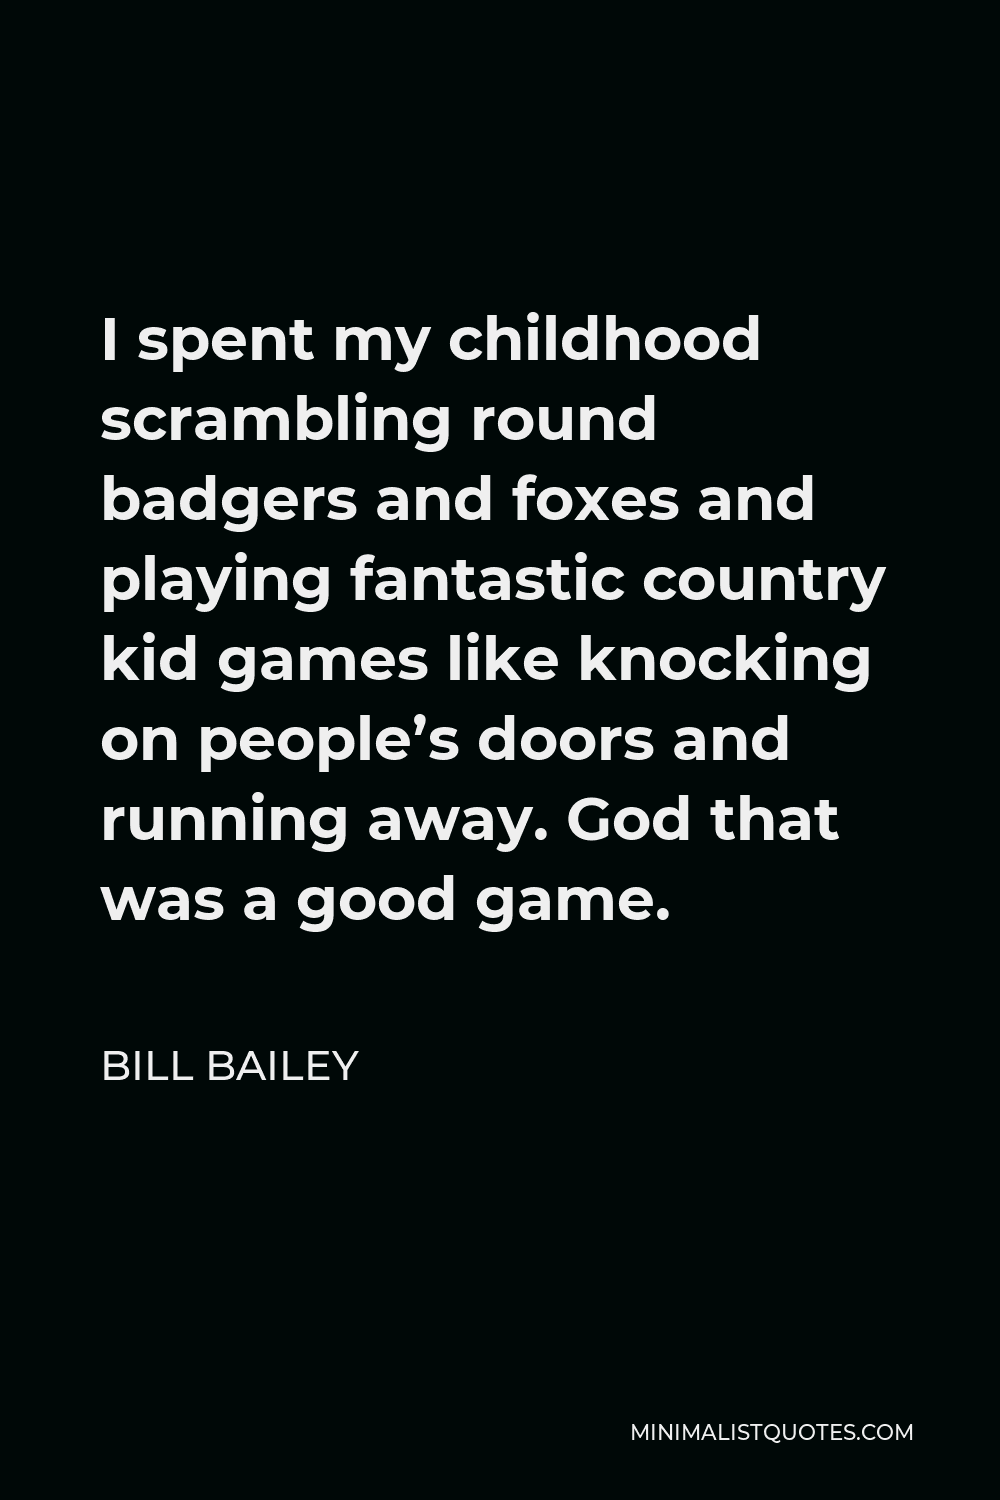 Bill Bailey Quote - I spent my childhood scrambling round badgers and foxes and playing fantastic country kid games like knocking on people’s doors and running away. God that was a good game.